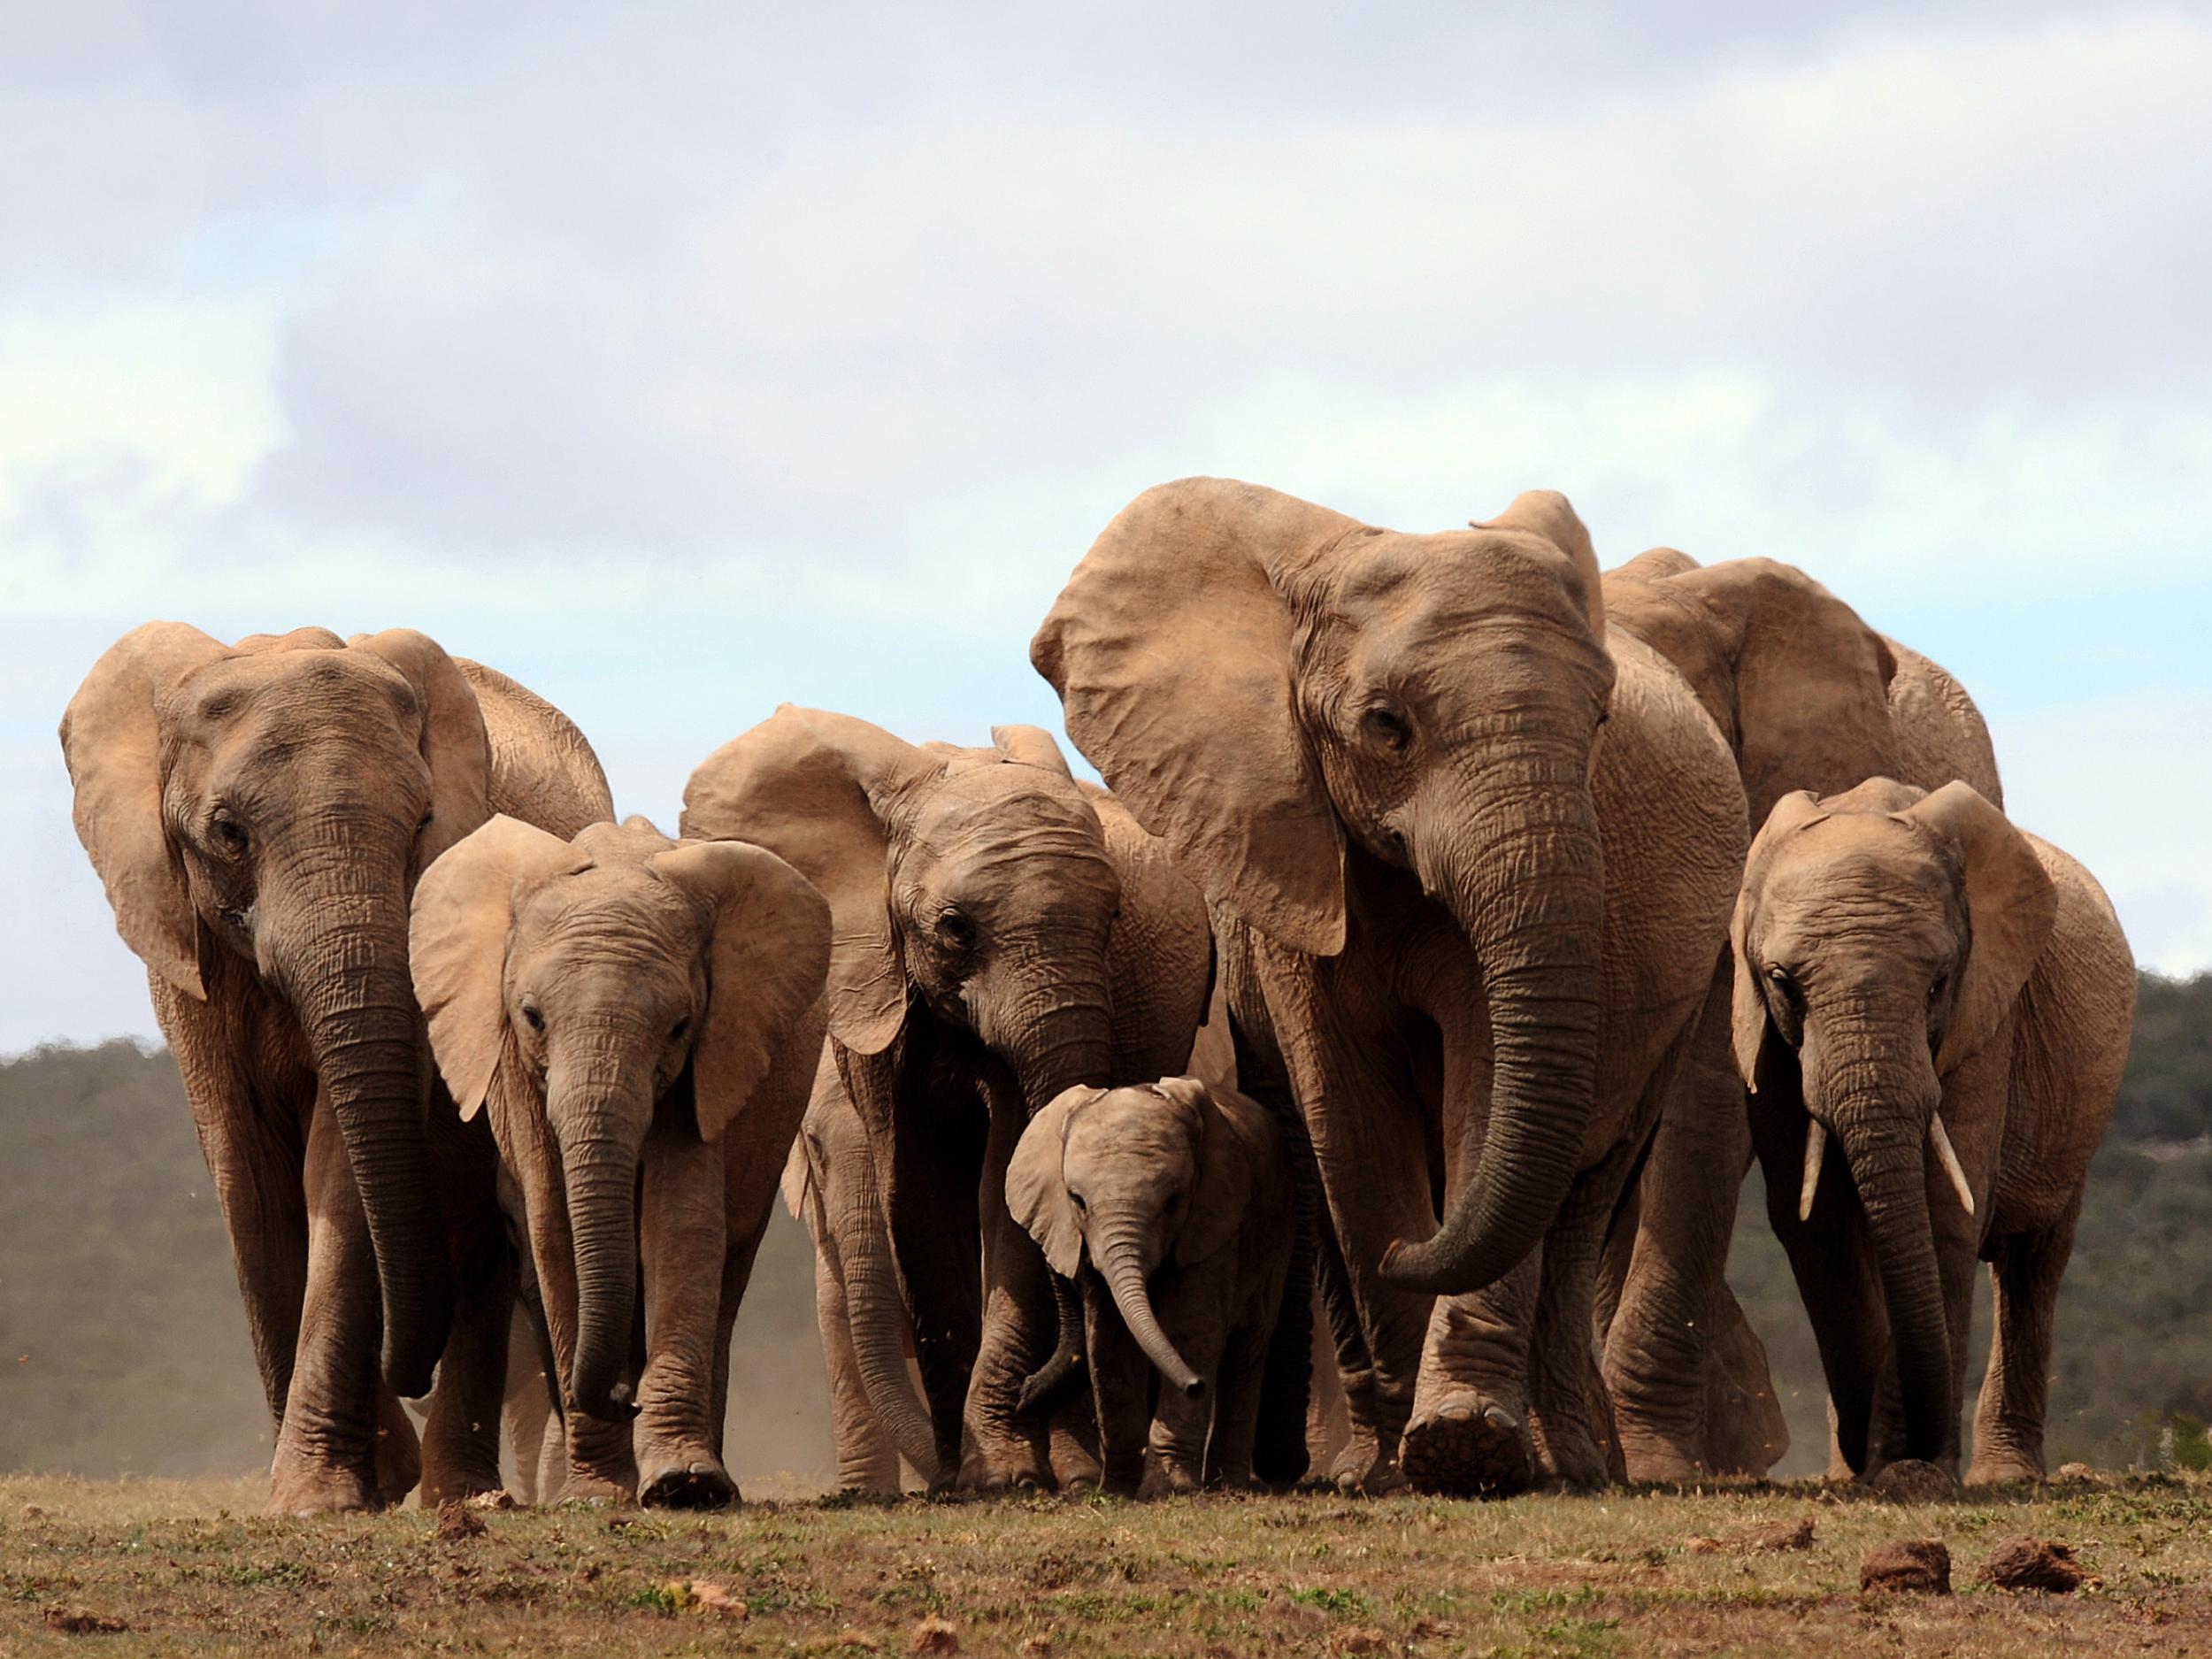 Africa's elephant population has decreased by an estimated 110,000, down to 415,000, since 2006